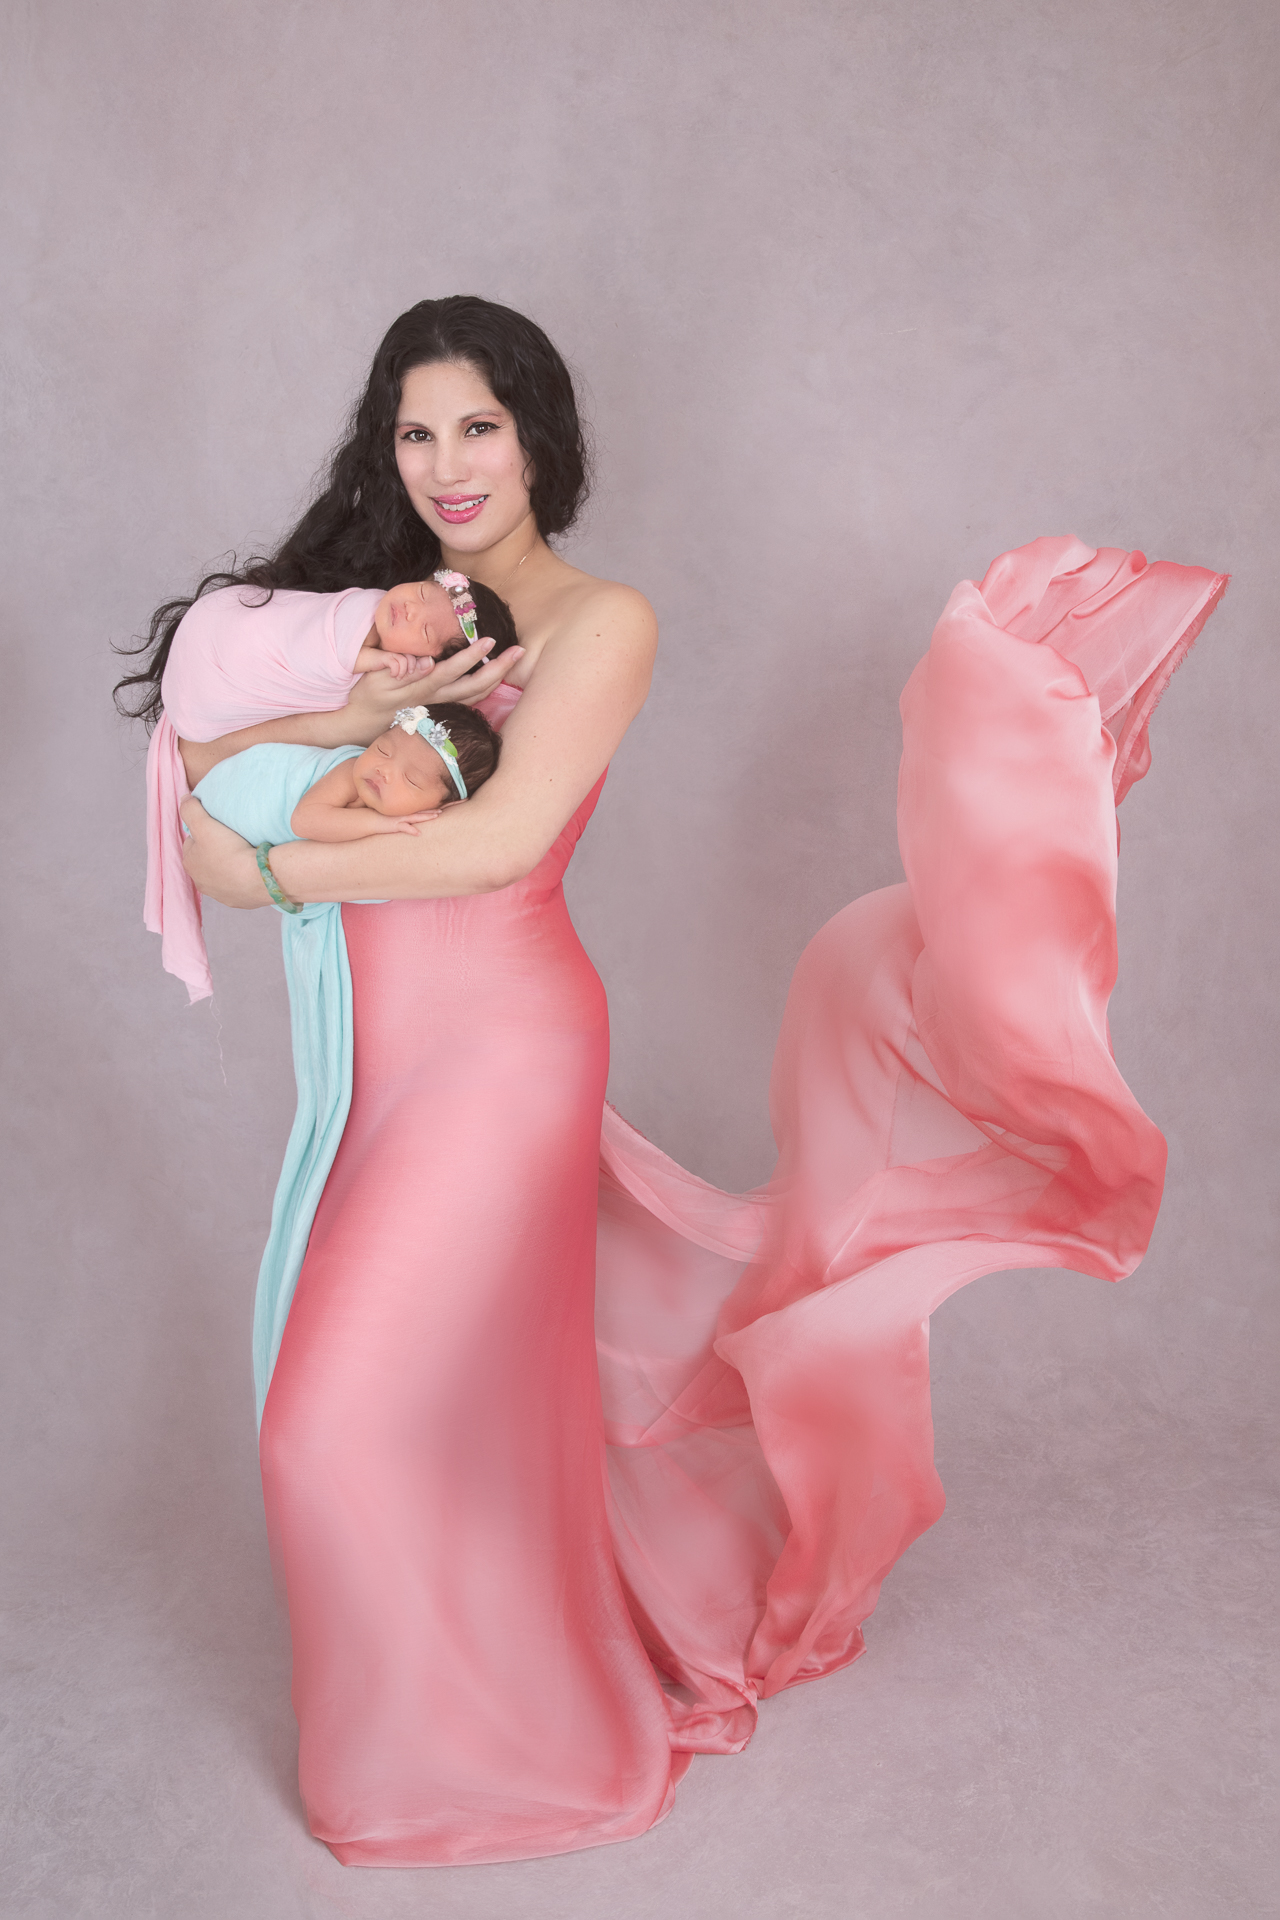 Mom posing indoors with her 2 newborn daughters on pink and green tones.